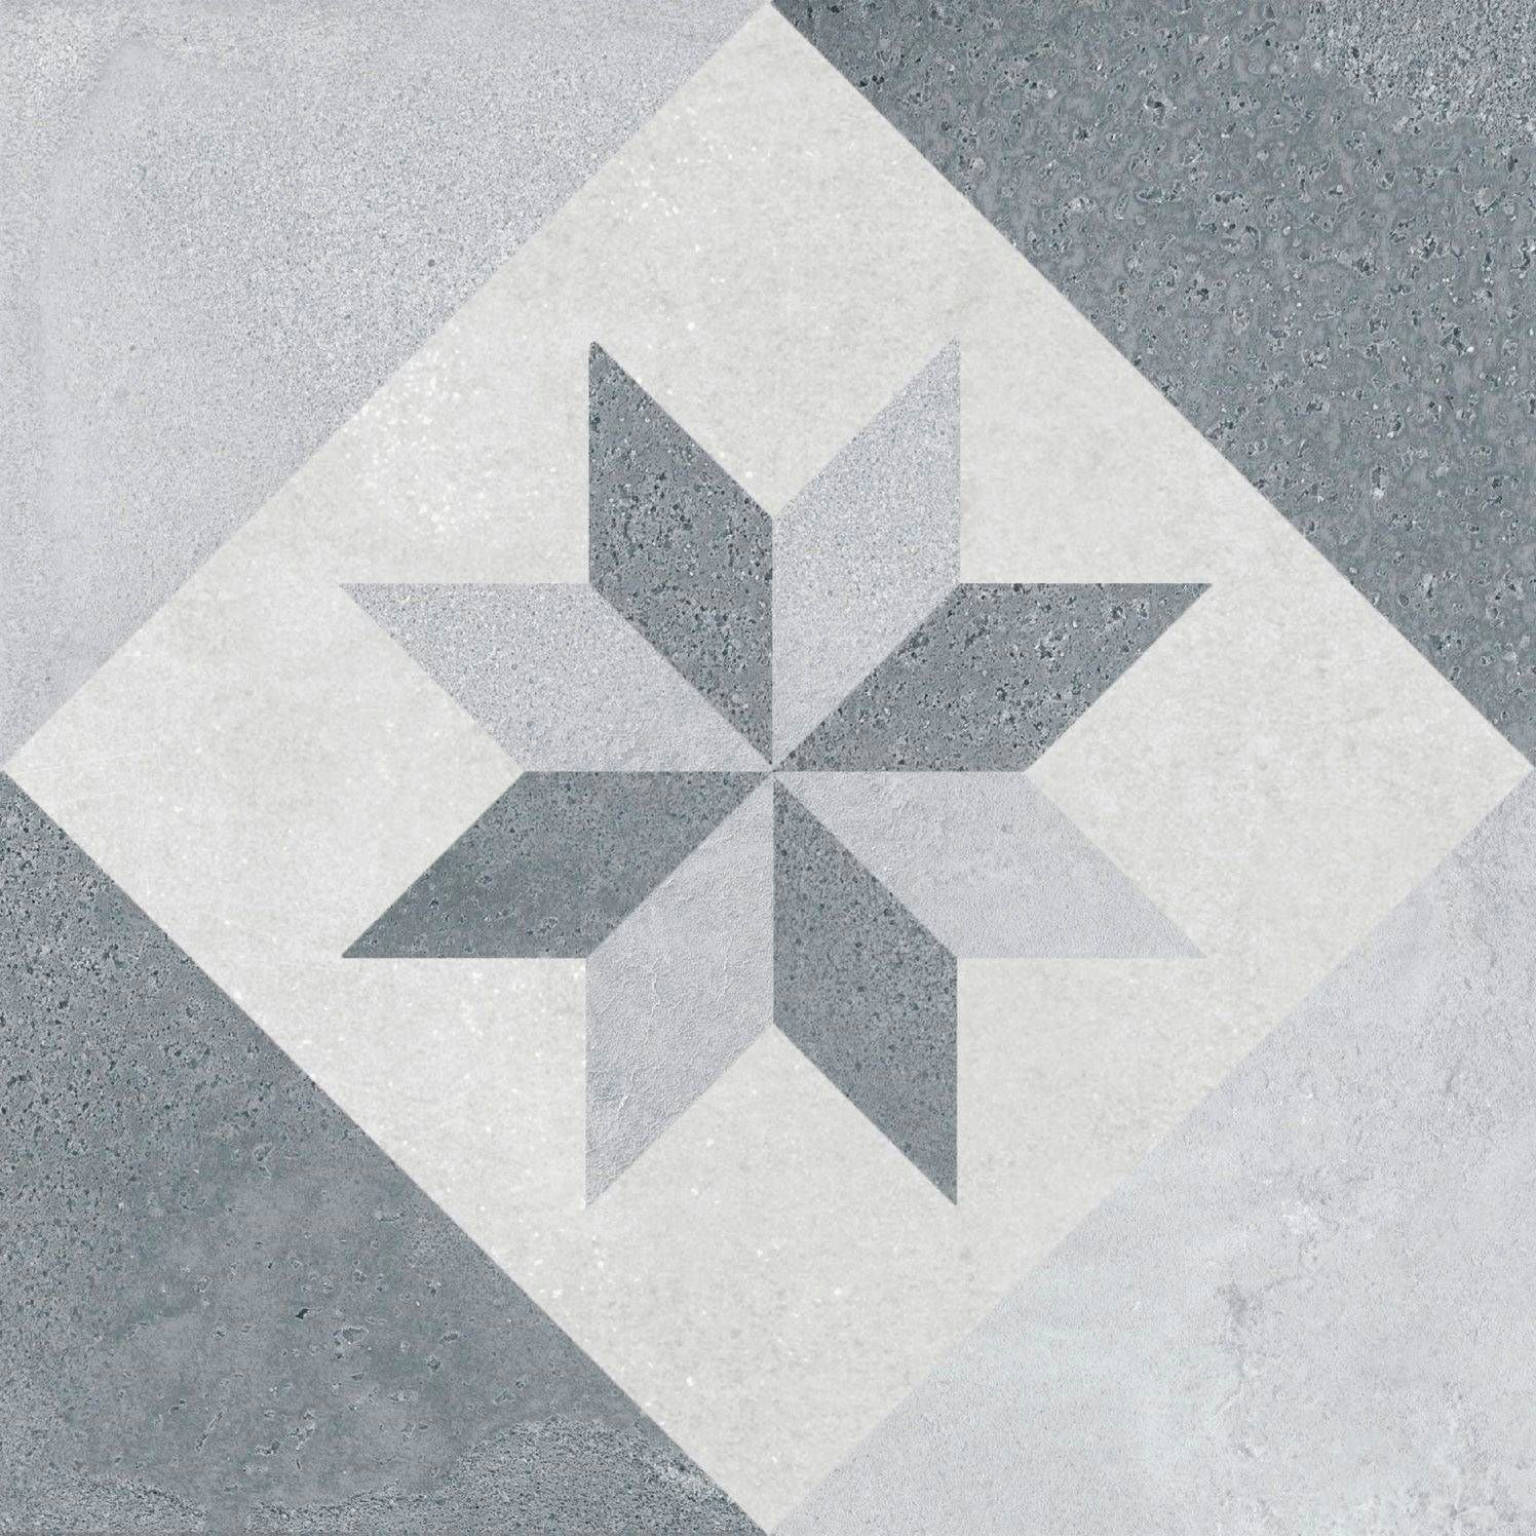 Décor Diamond | Stones & More | Finest selection of Mosaics, Glass, Tile and Stone